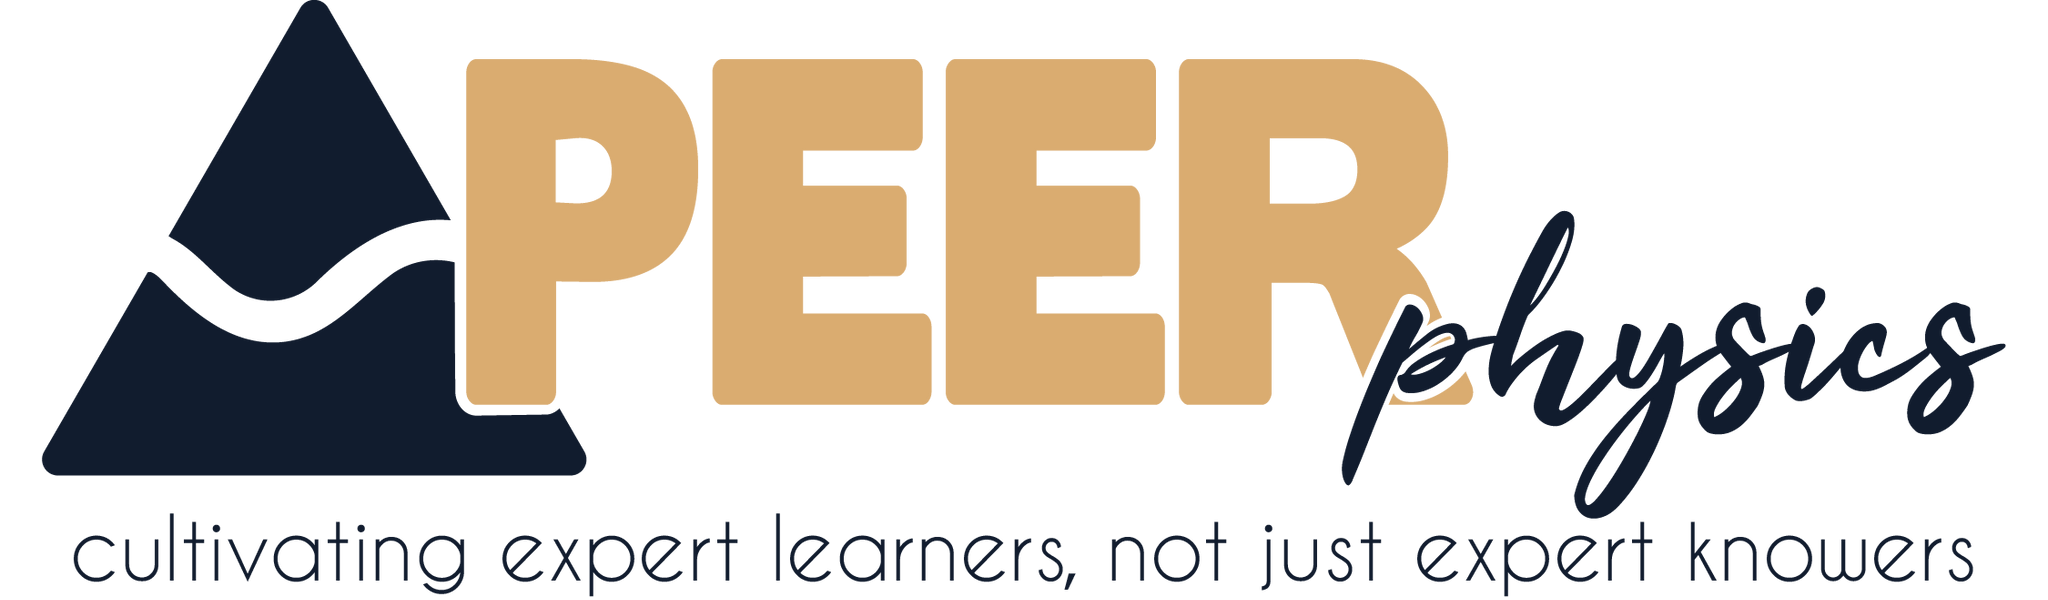 PEER Physics logo with the tagline 